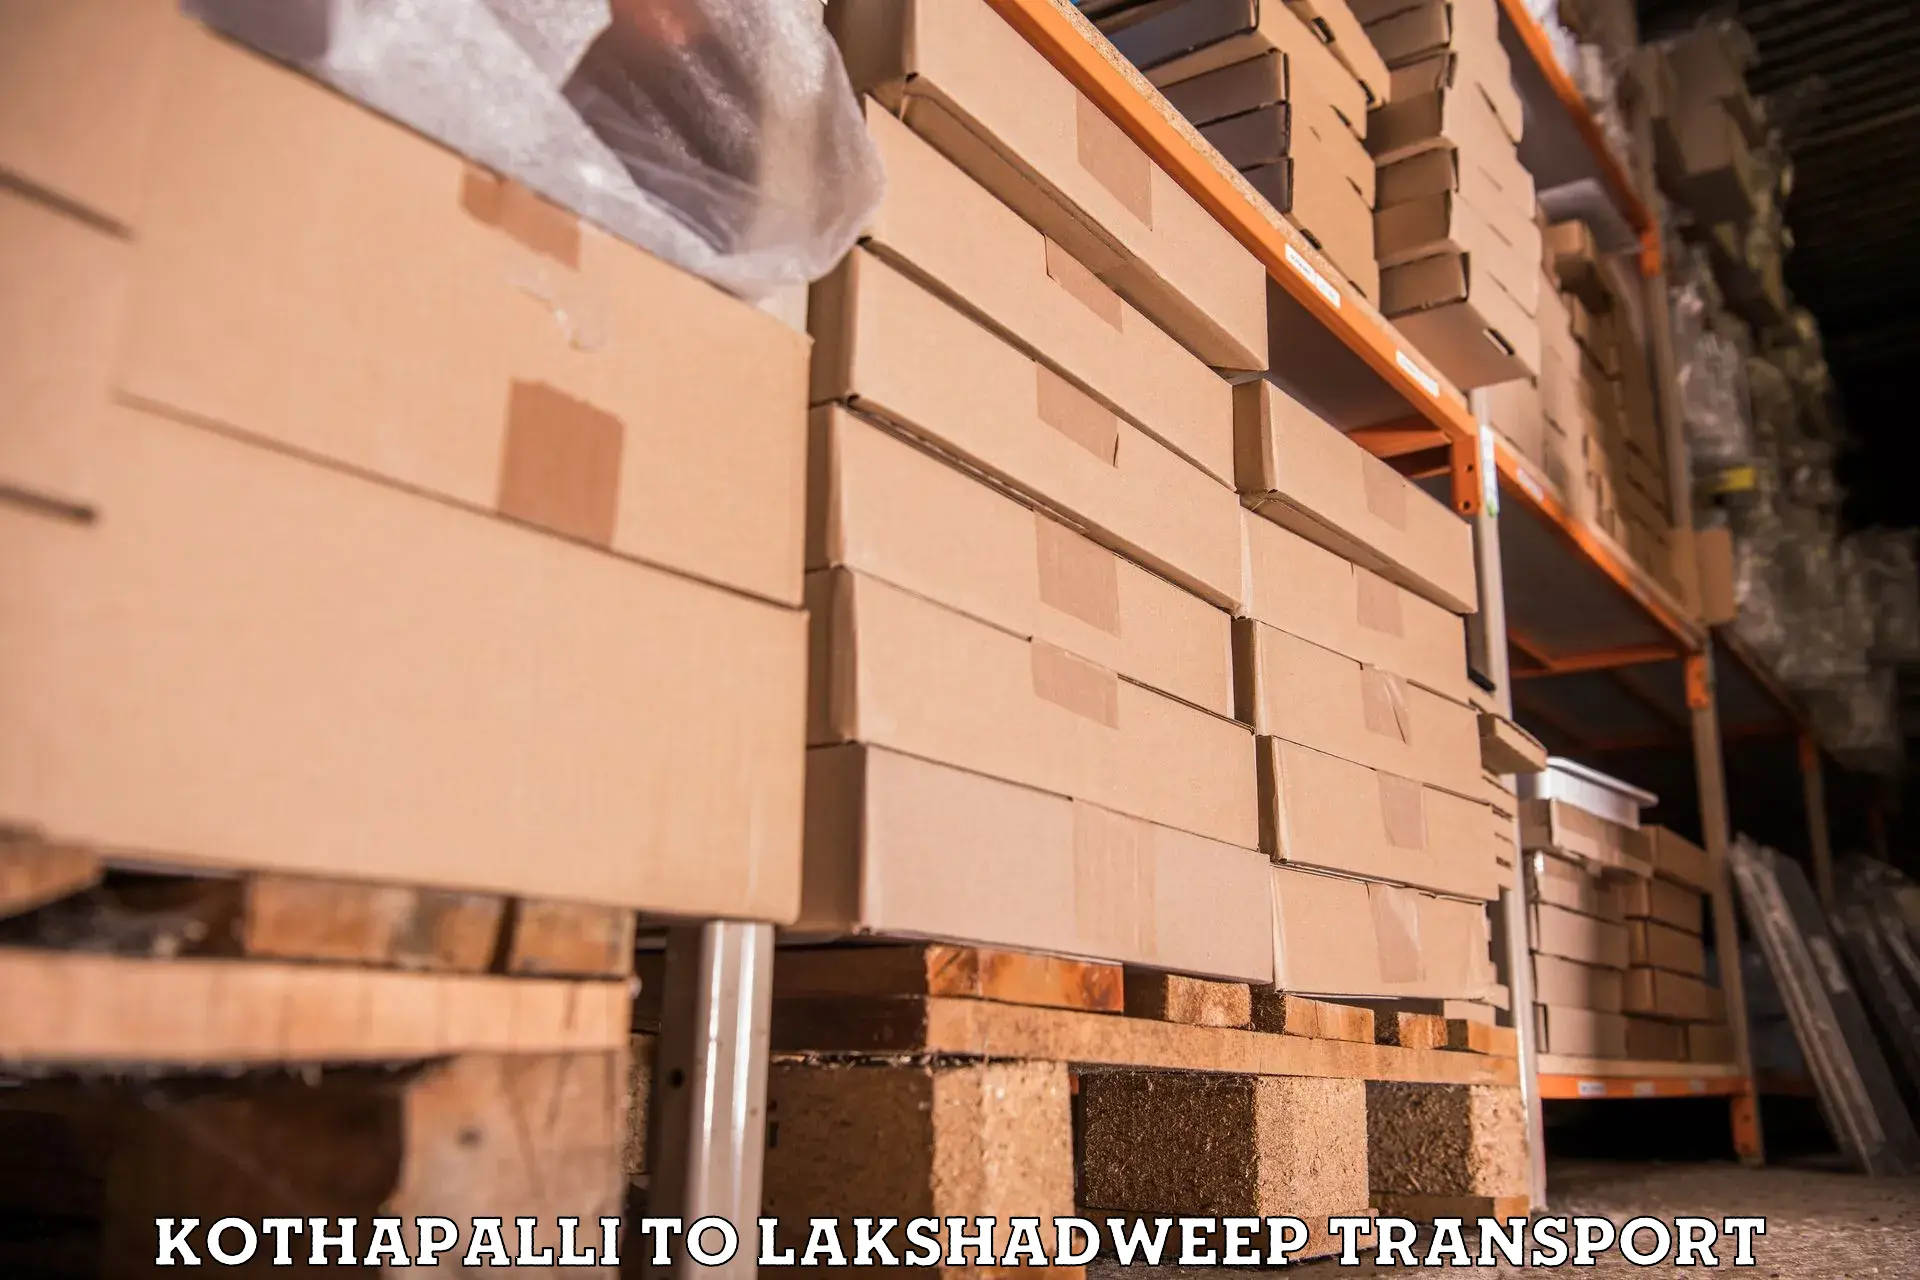 Express transport services in Kothapalli to Lakshadweep